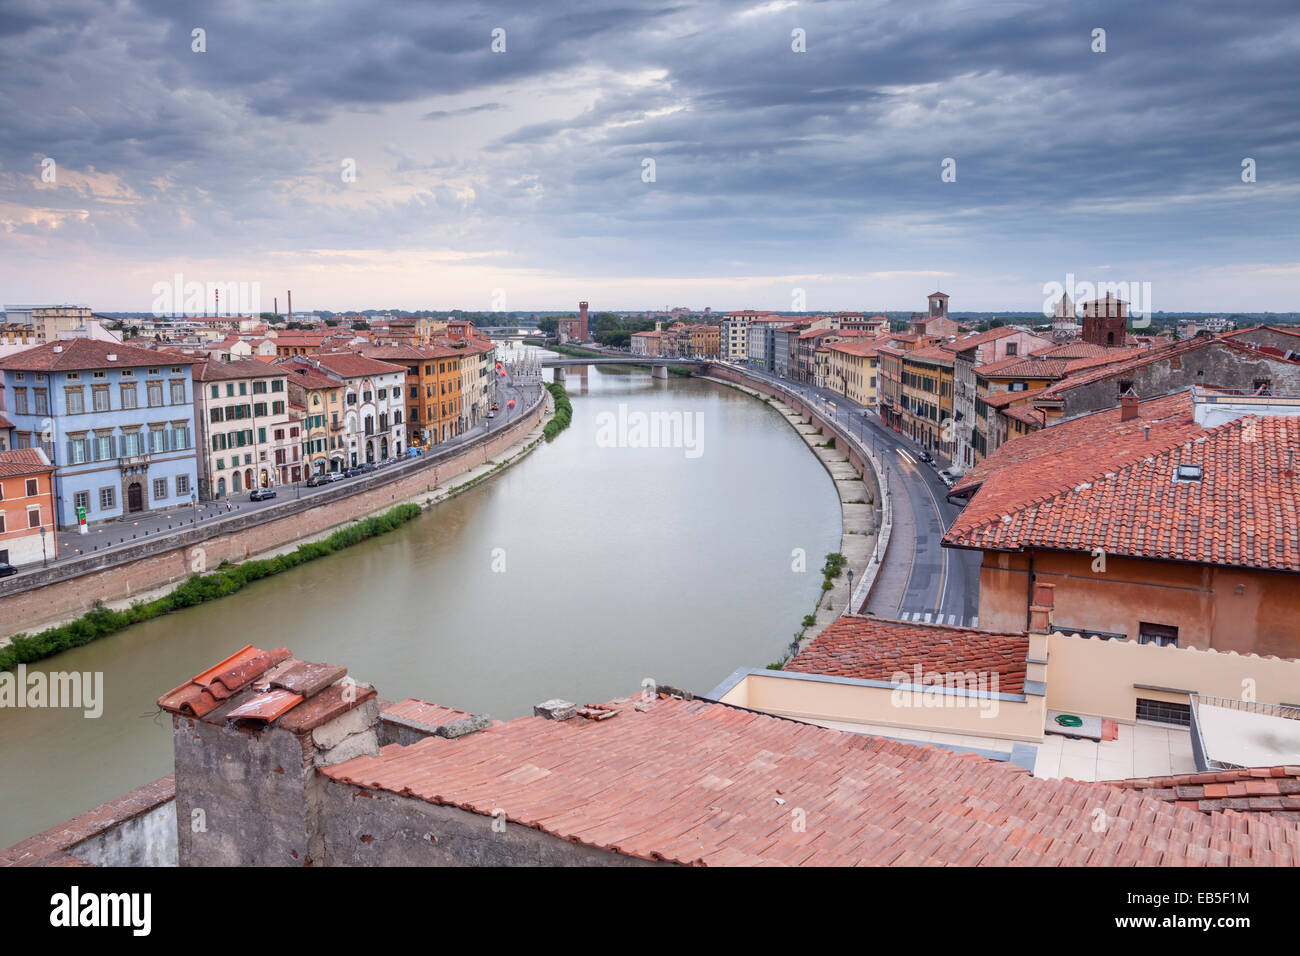 The historic centre of Pisa and the River Arno. Stock Photo